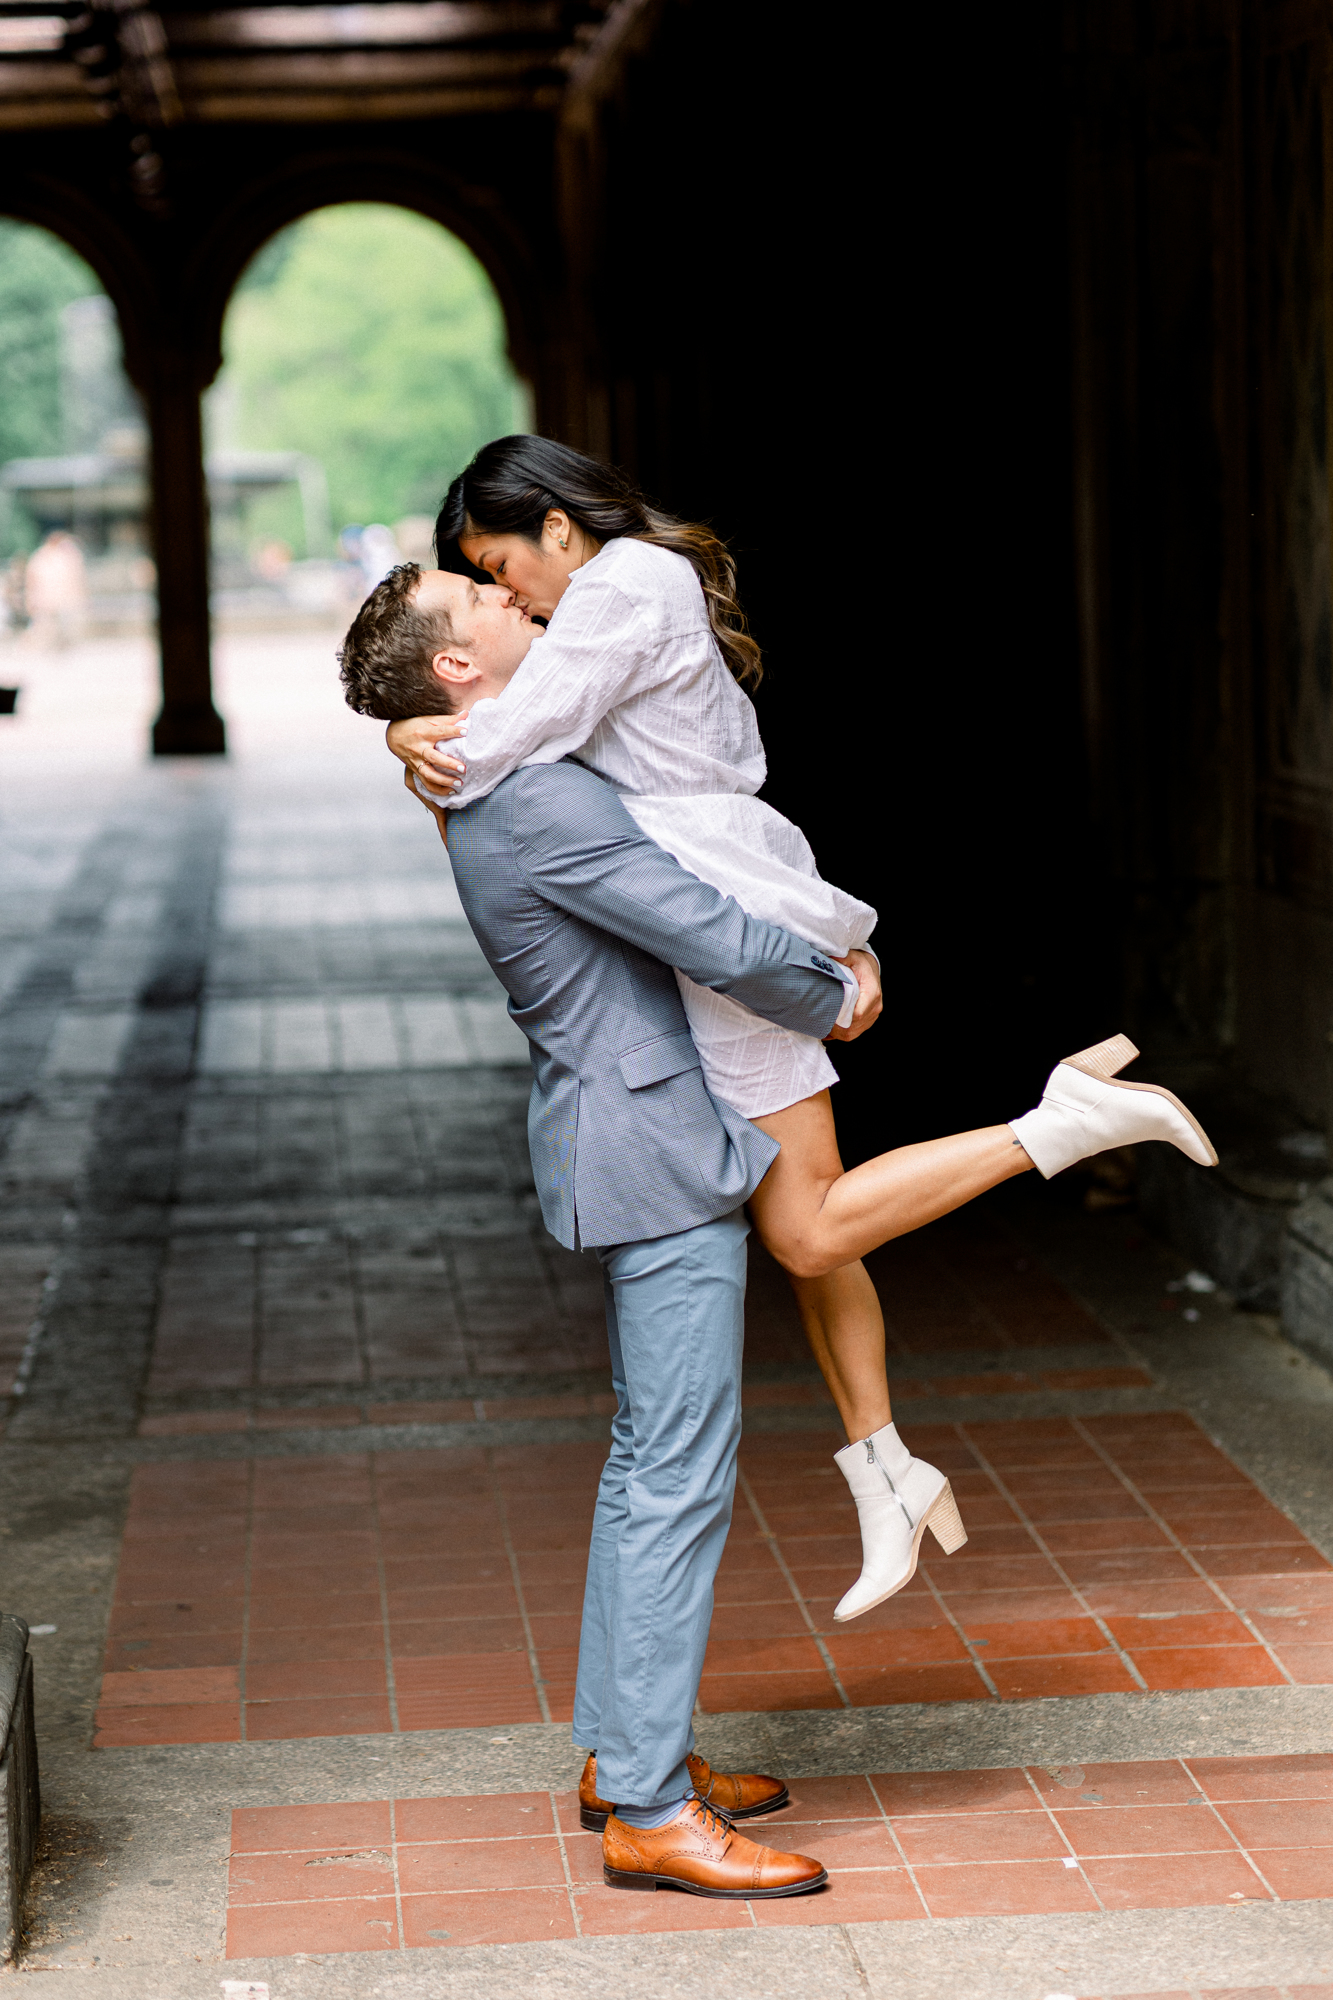 Playful Central Park Rowboat Engagement Photography in New York